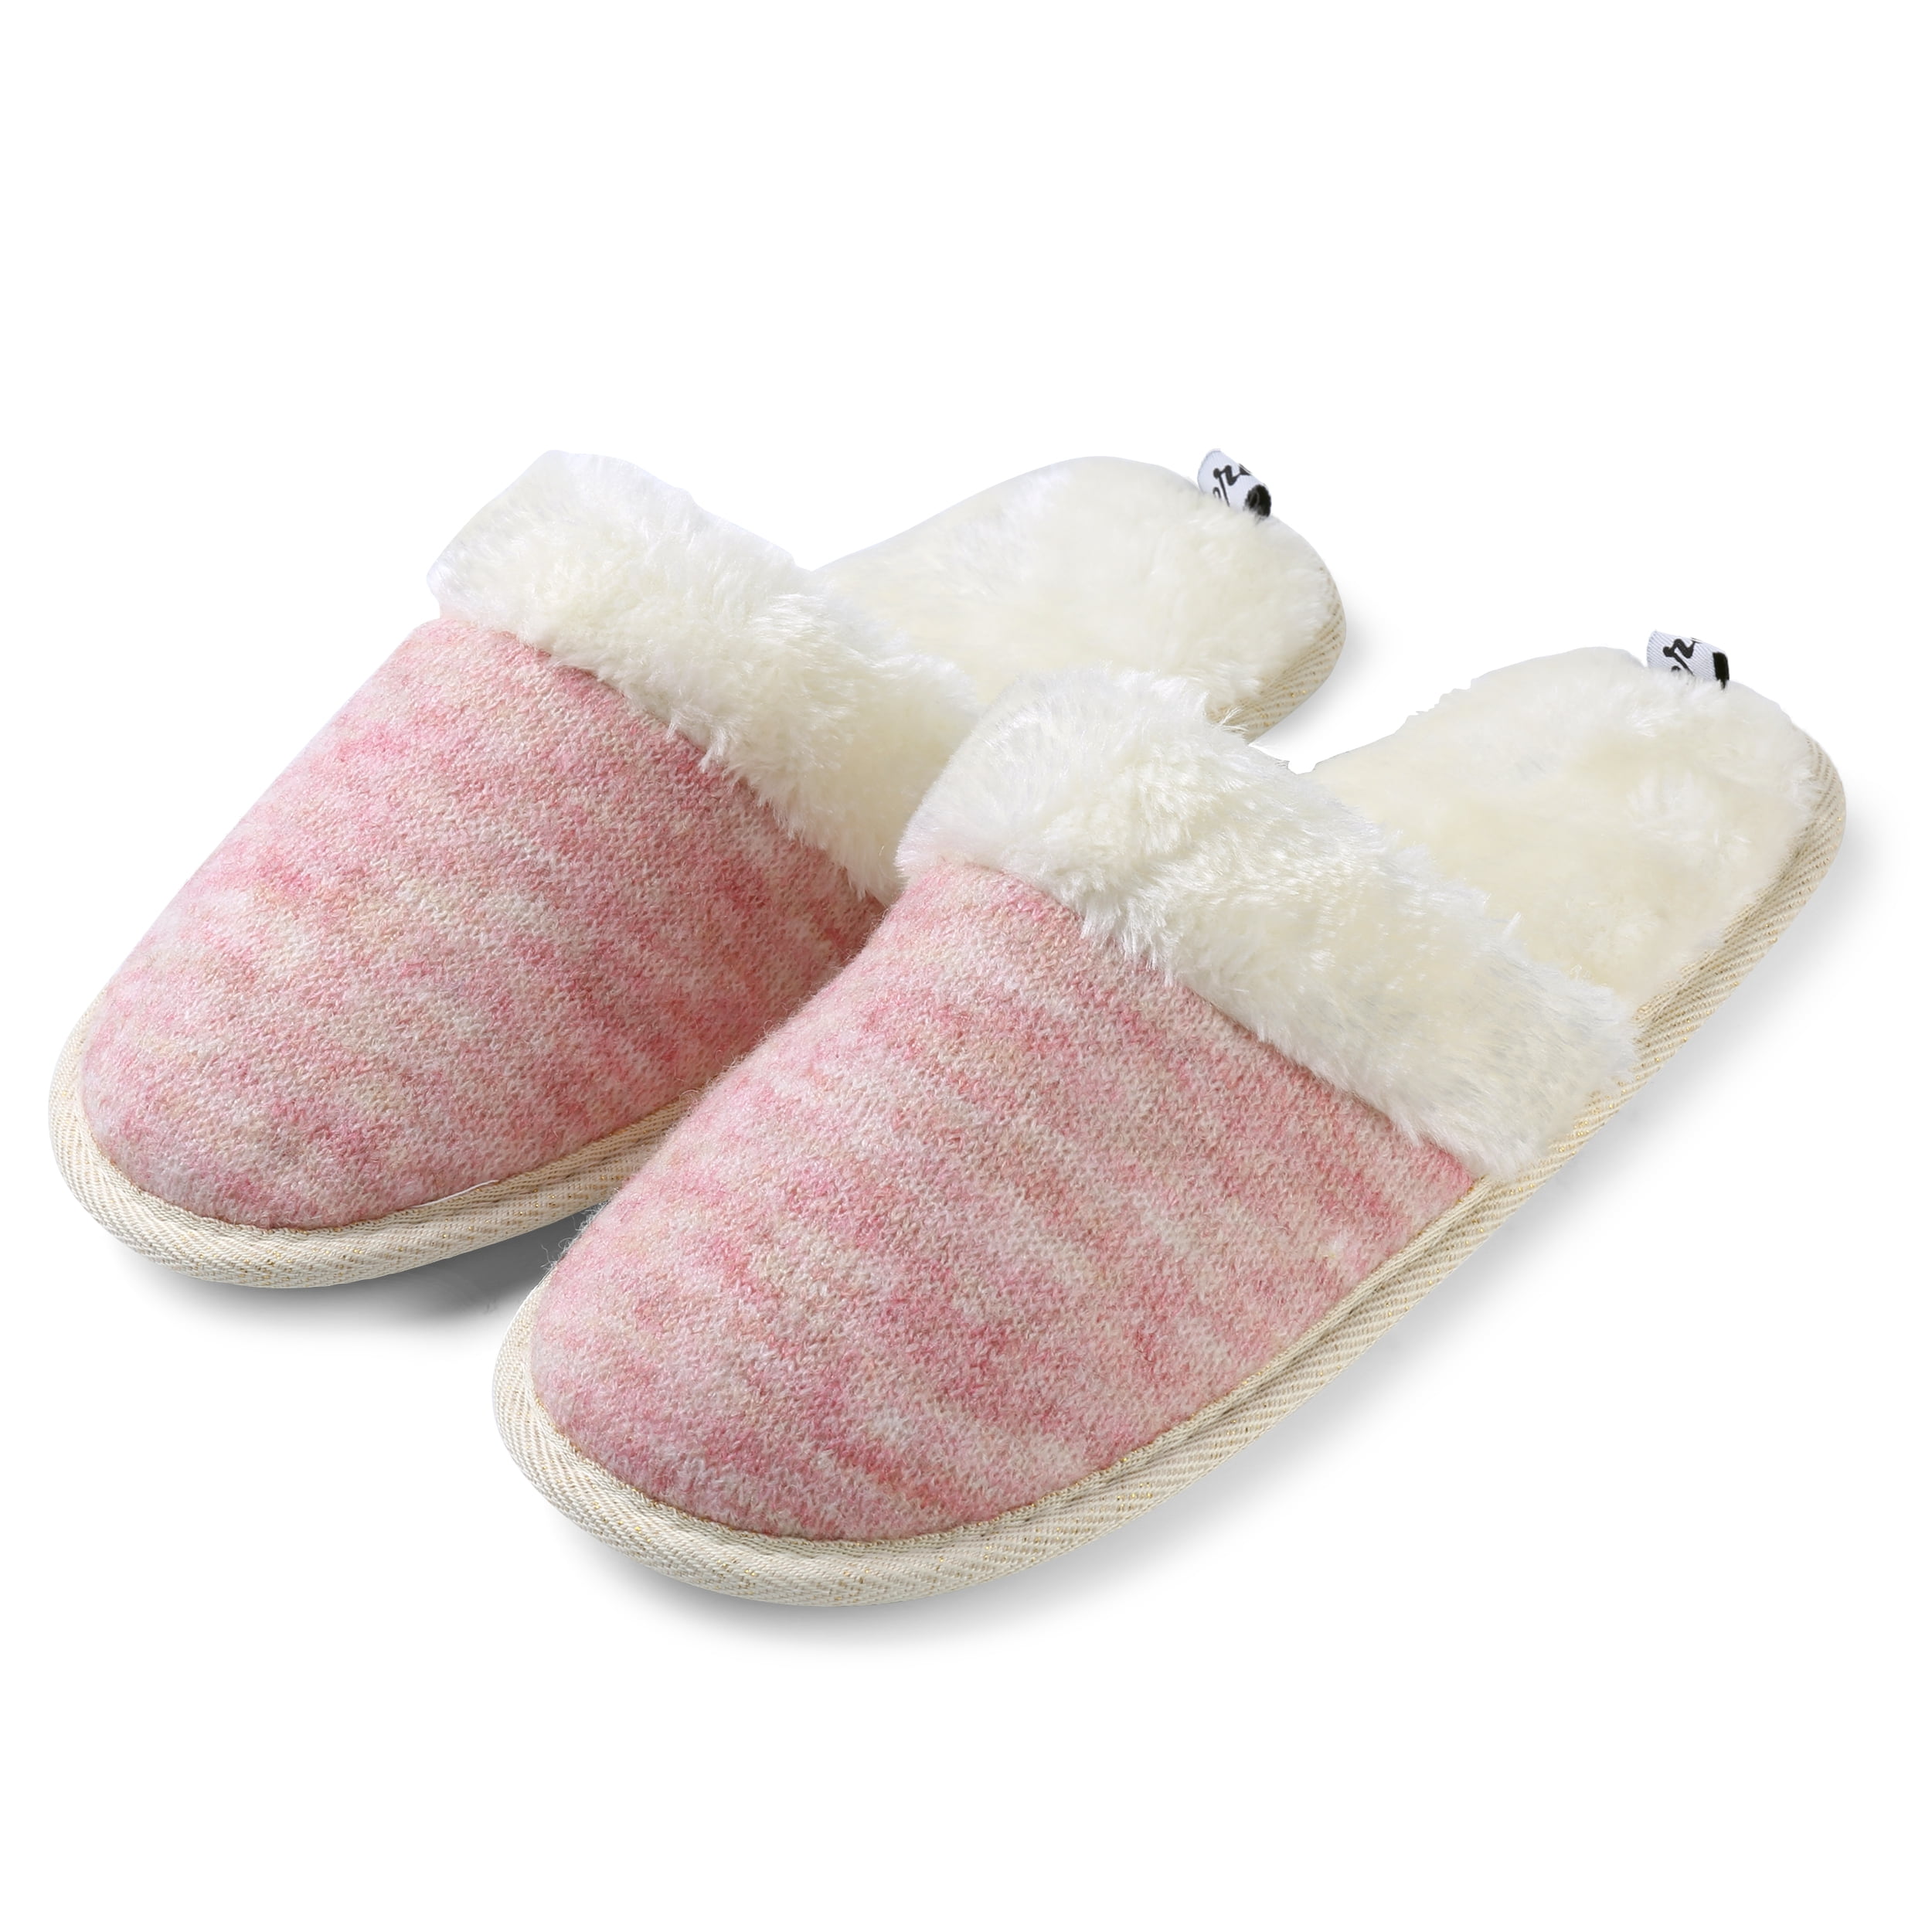 Soft Comfy Luxurious Snoozies Slippers House Indoor Slippers - Walmart.com